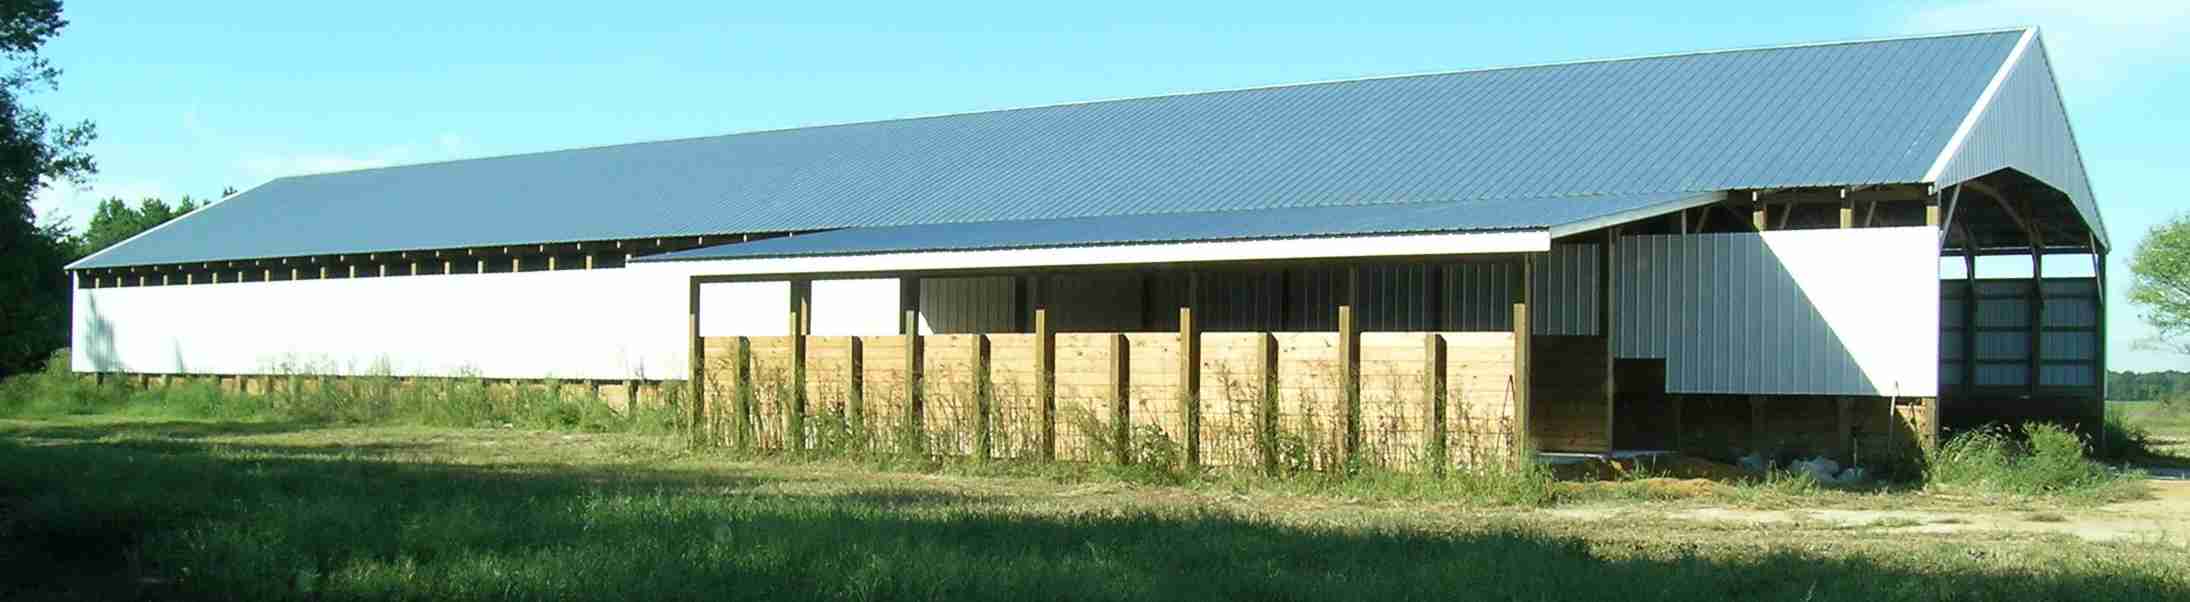 NRCS Approved Manure Storage Shed, side view